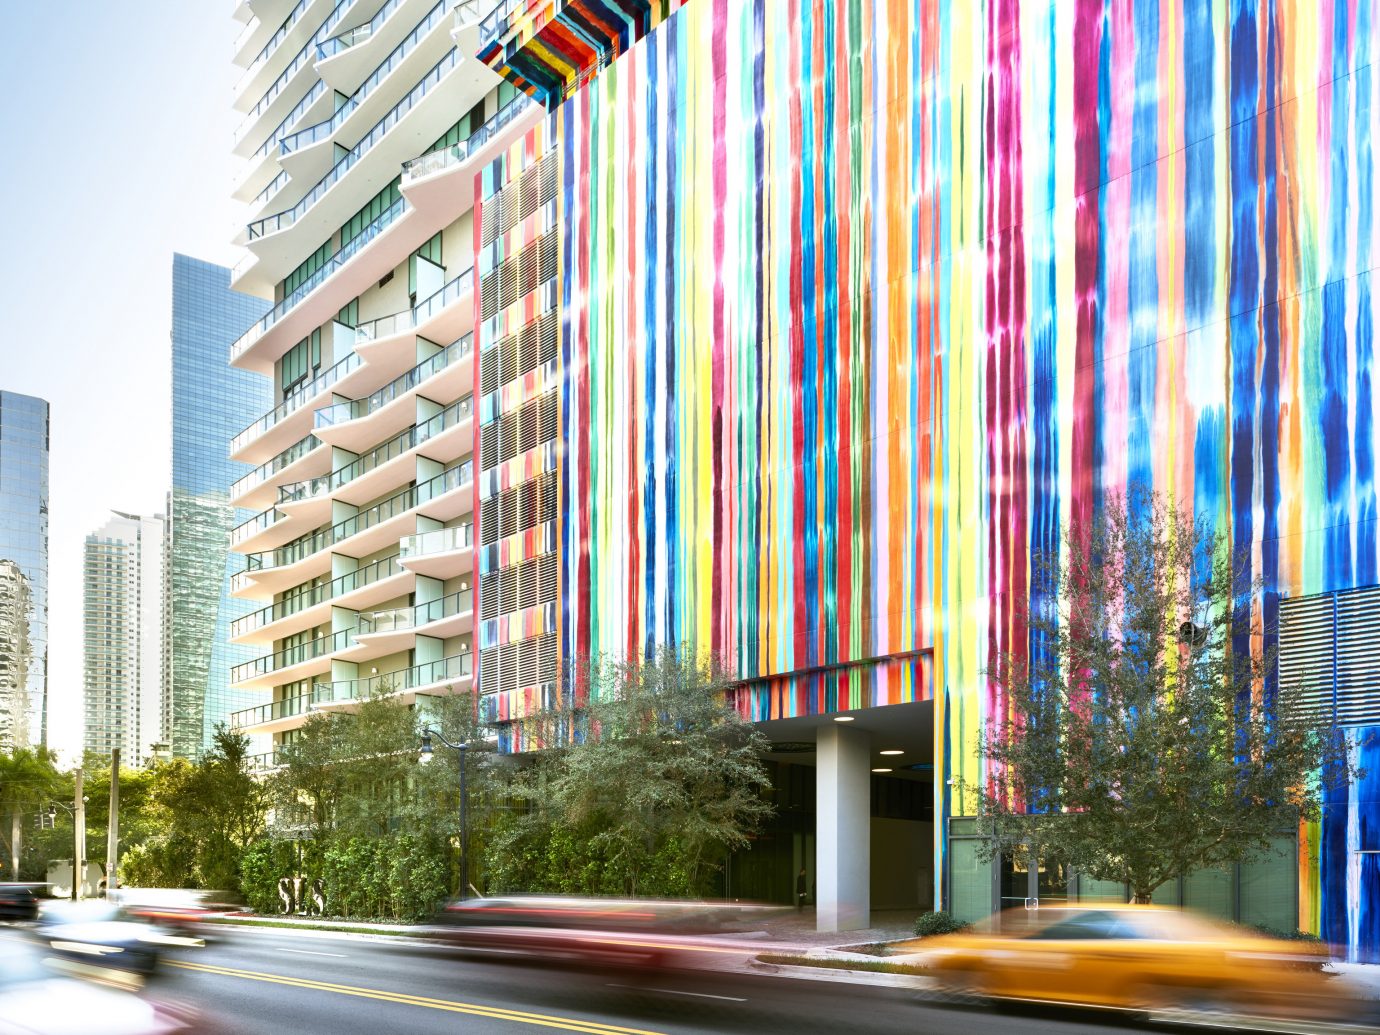 Hotels outdoor urban area Architecture interior design facade Downtown condominium lighting City skyscraper tower block window covering colorful lined tall